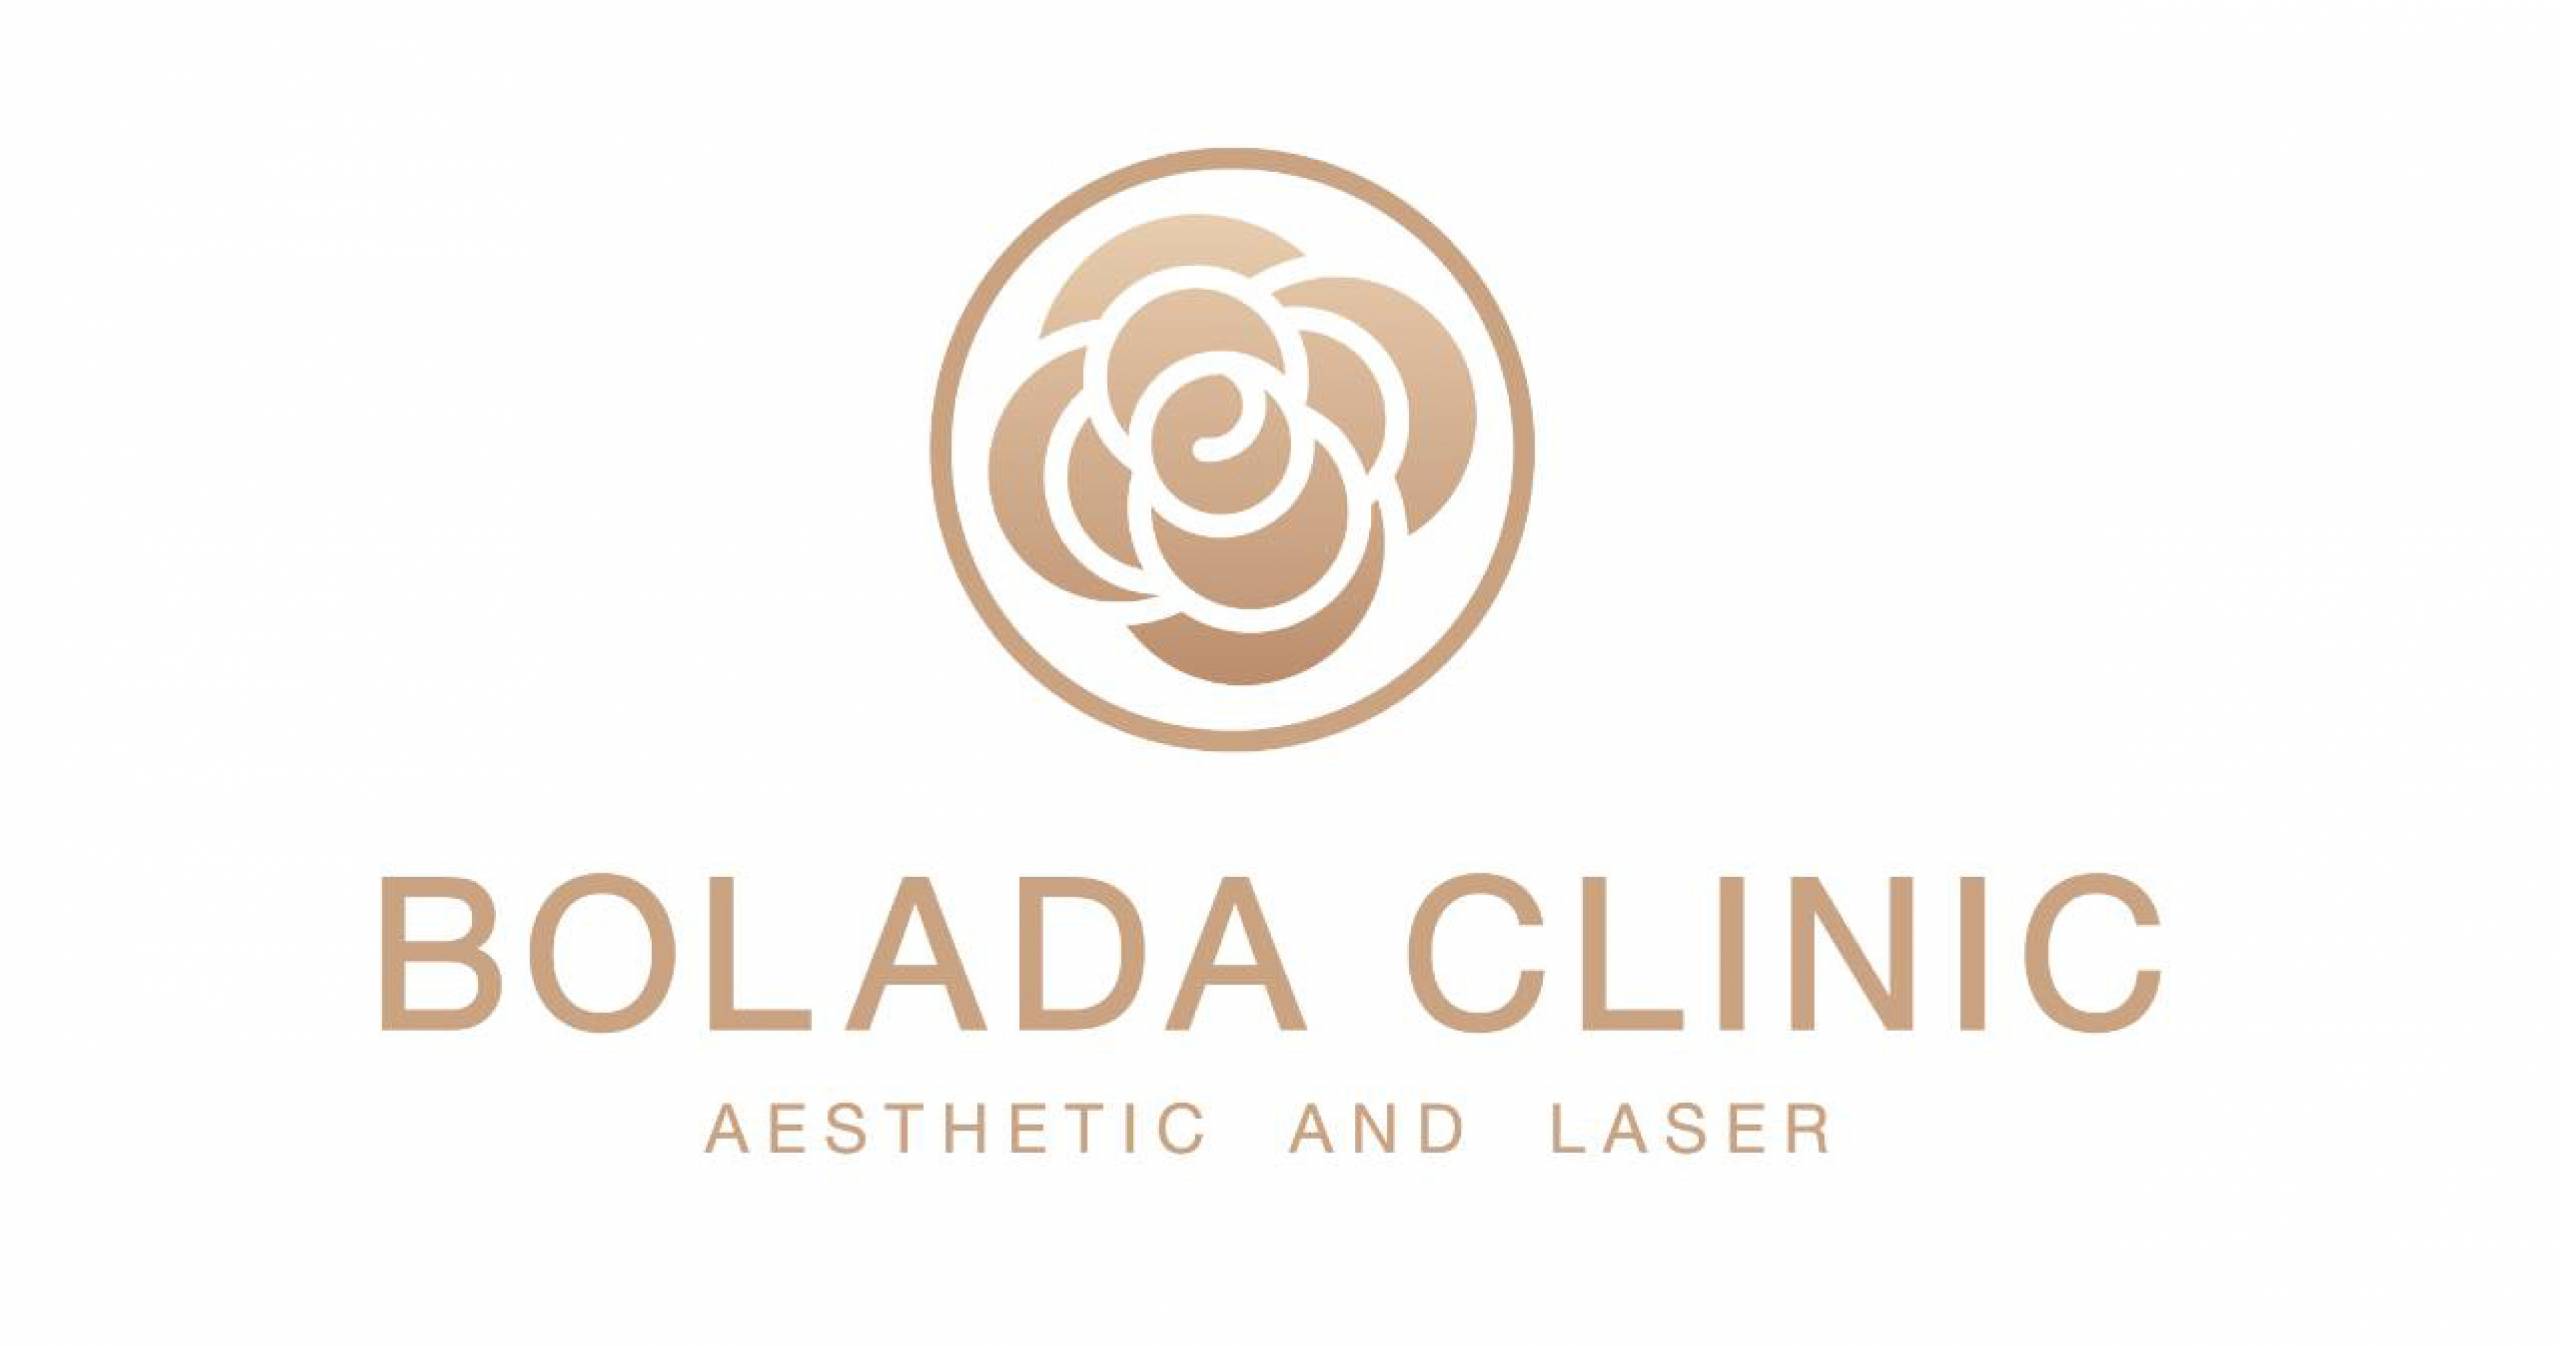 Bolada Clinic Aesthetic and Laser